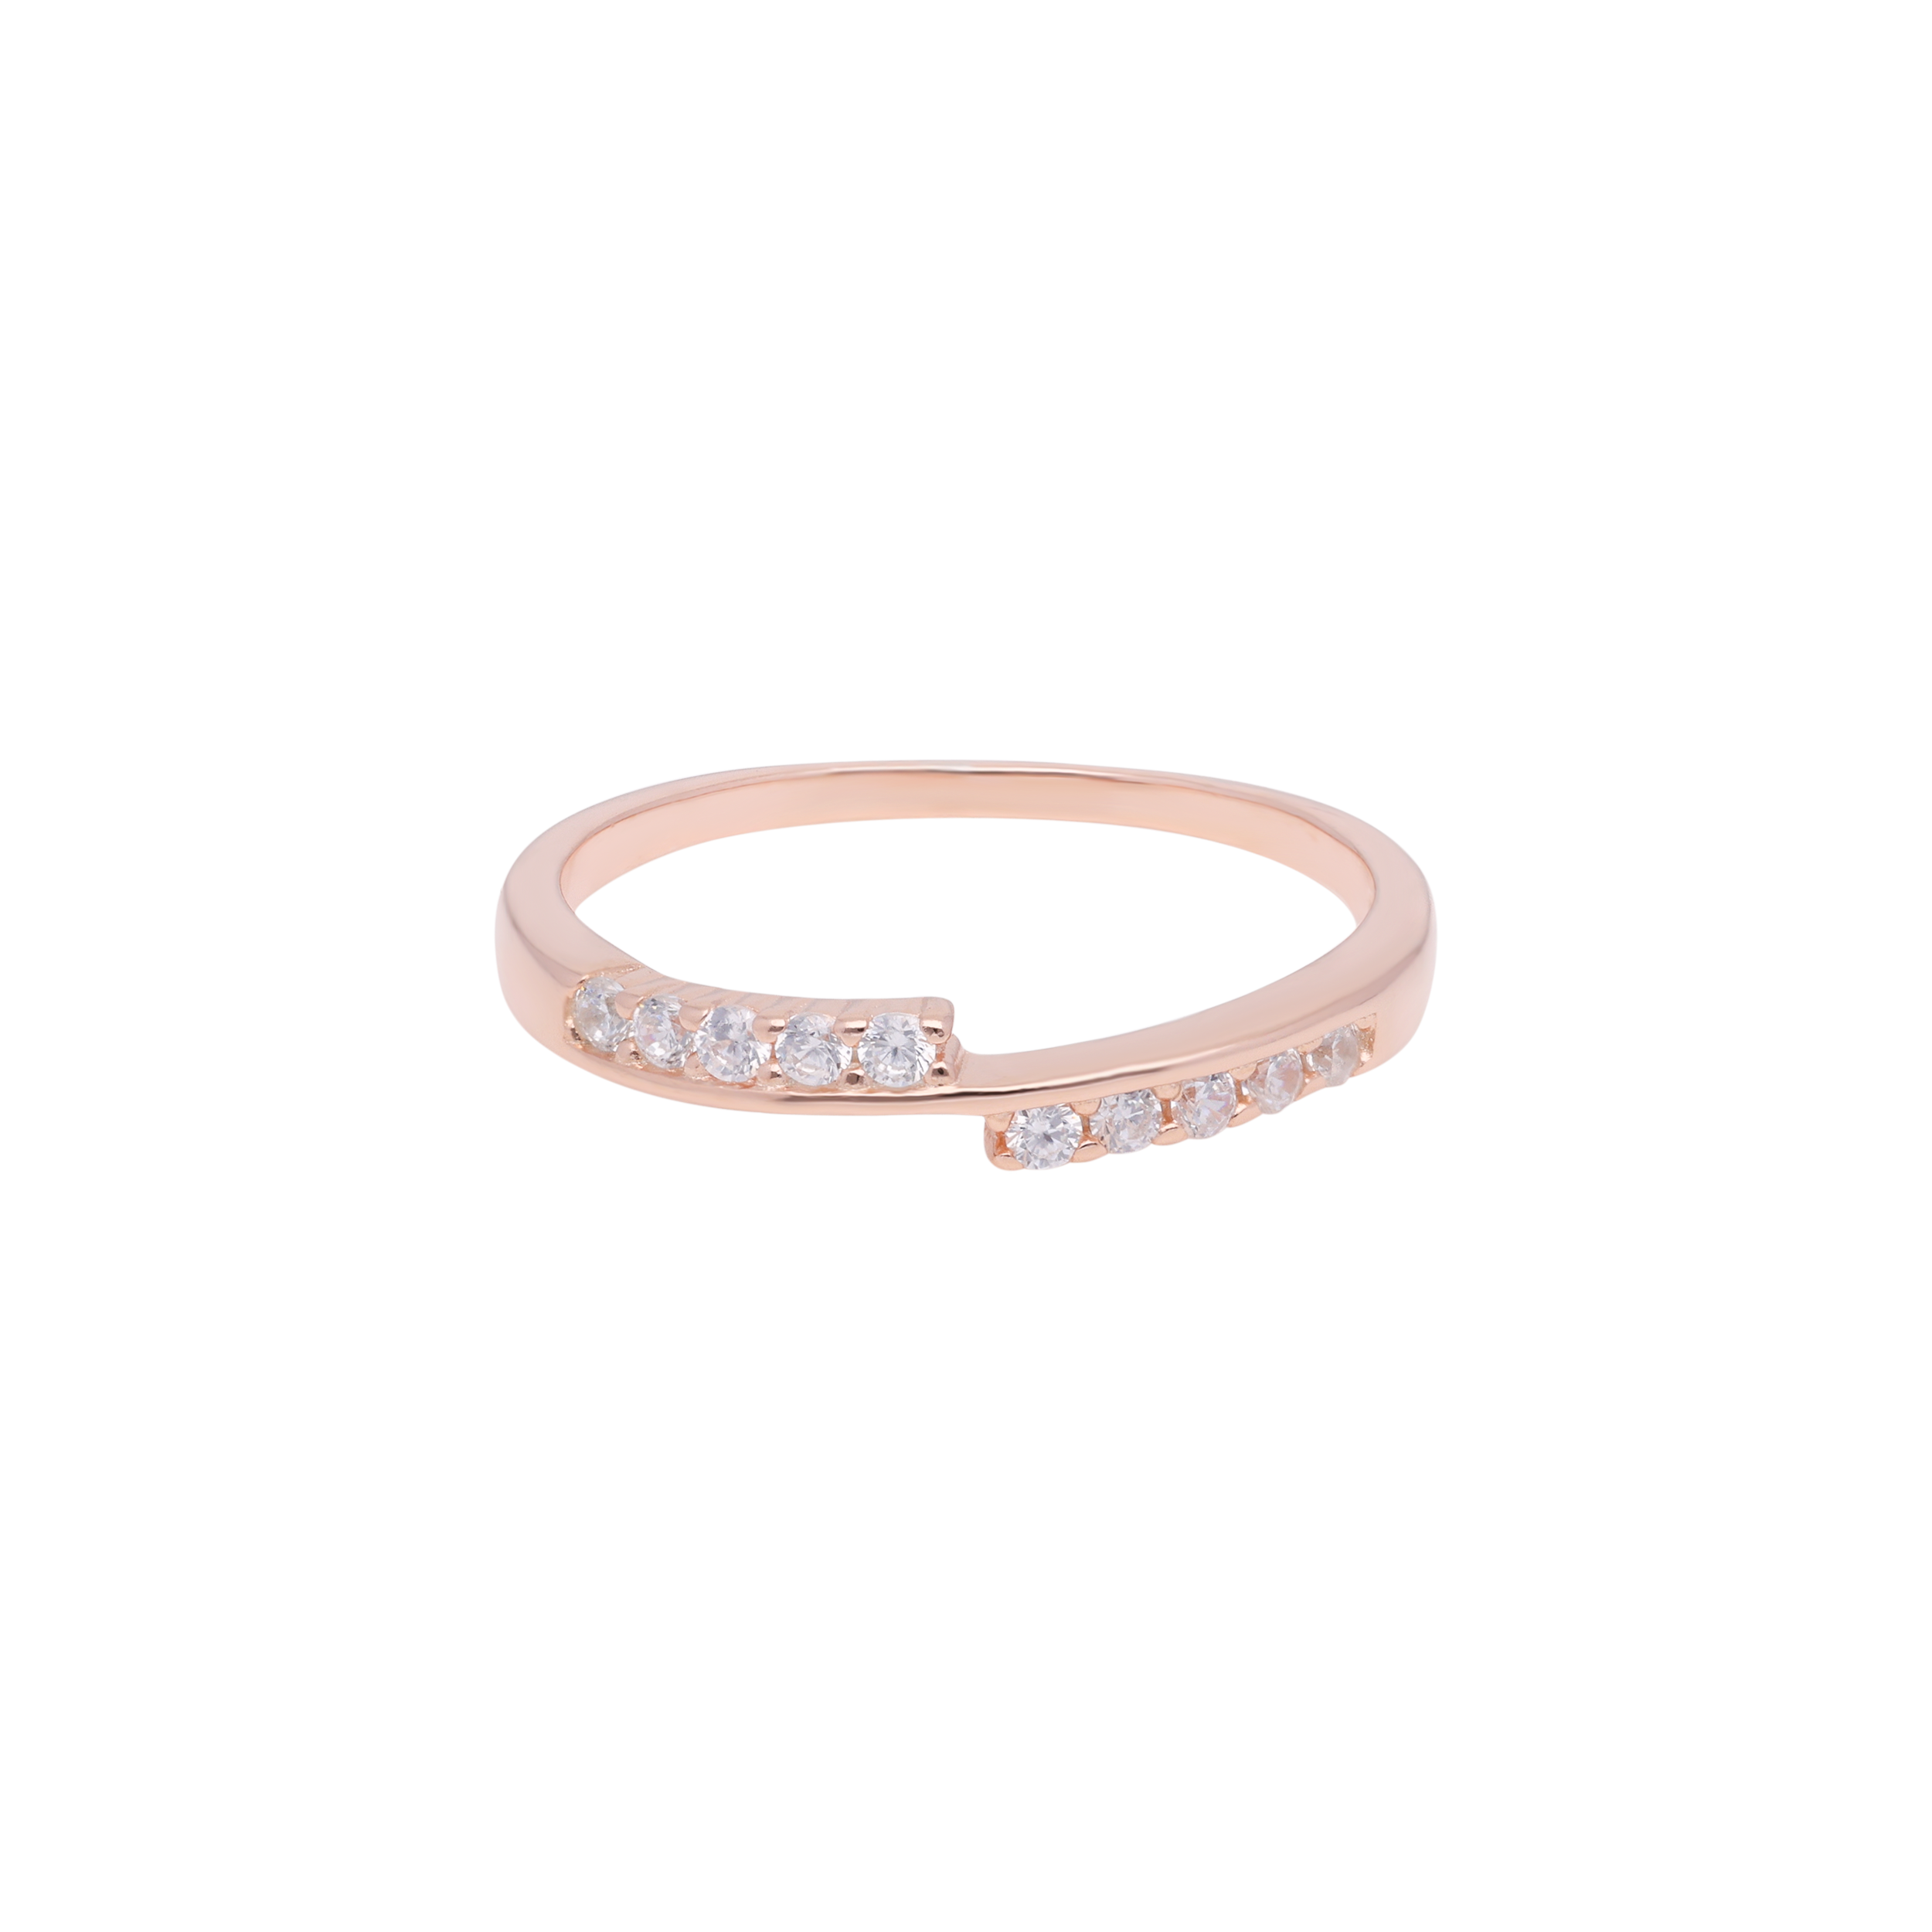 Rosé Radiance: Sterling Silver Band Ring with Rose Gold Accents | SKU : 0019799216, 0019799179, 0019799155, 0019799162, 0019799209, 0019799193, 0019799186, 0019799223, 0019799131,  0019799148